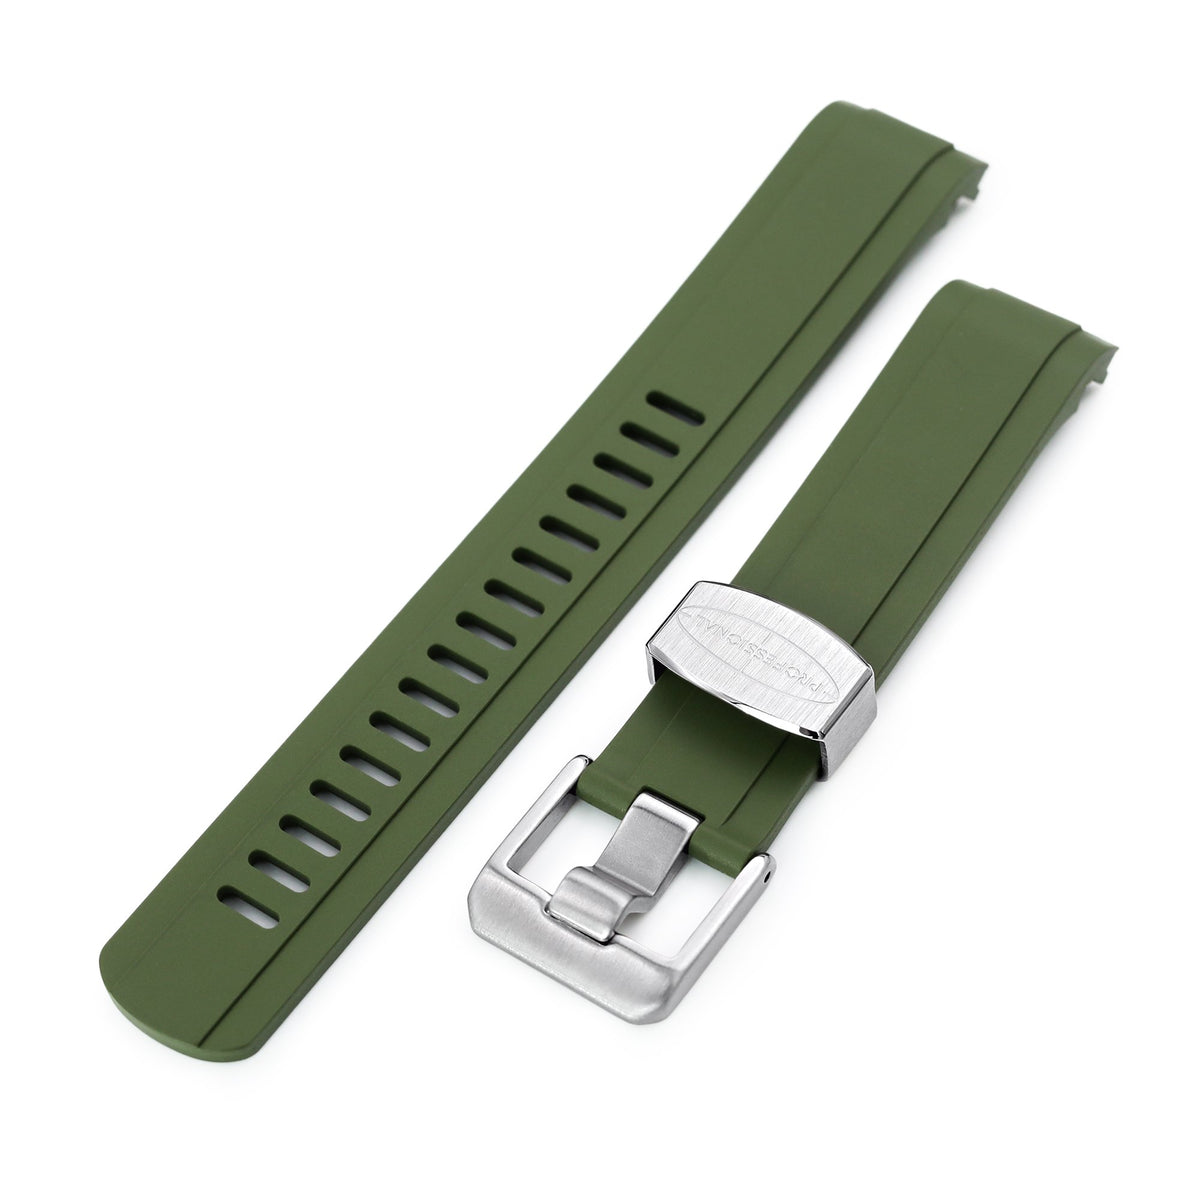 20mm Crafter Blue - Military Green Rubber Curved Lug Watch Strap for Seiko Baby MM200 &amp; Mini Turtles SRPC35 Strapcode Watch Bands